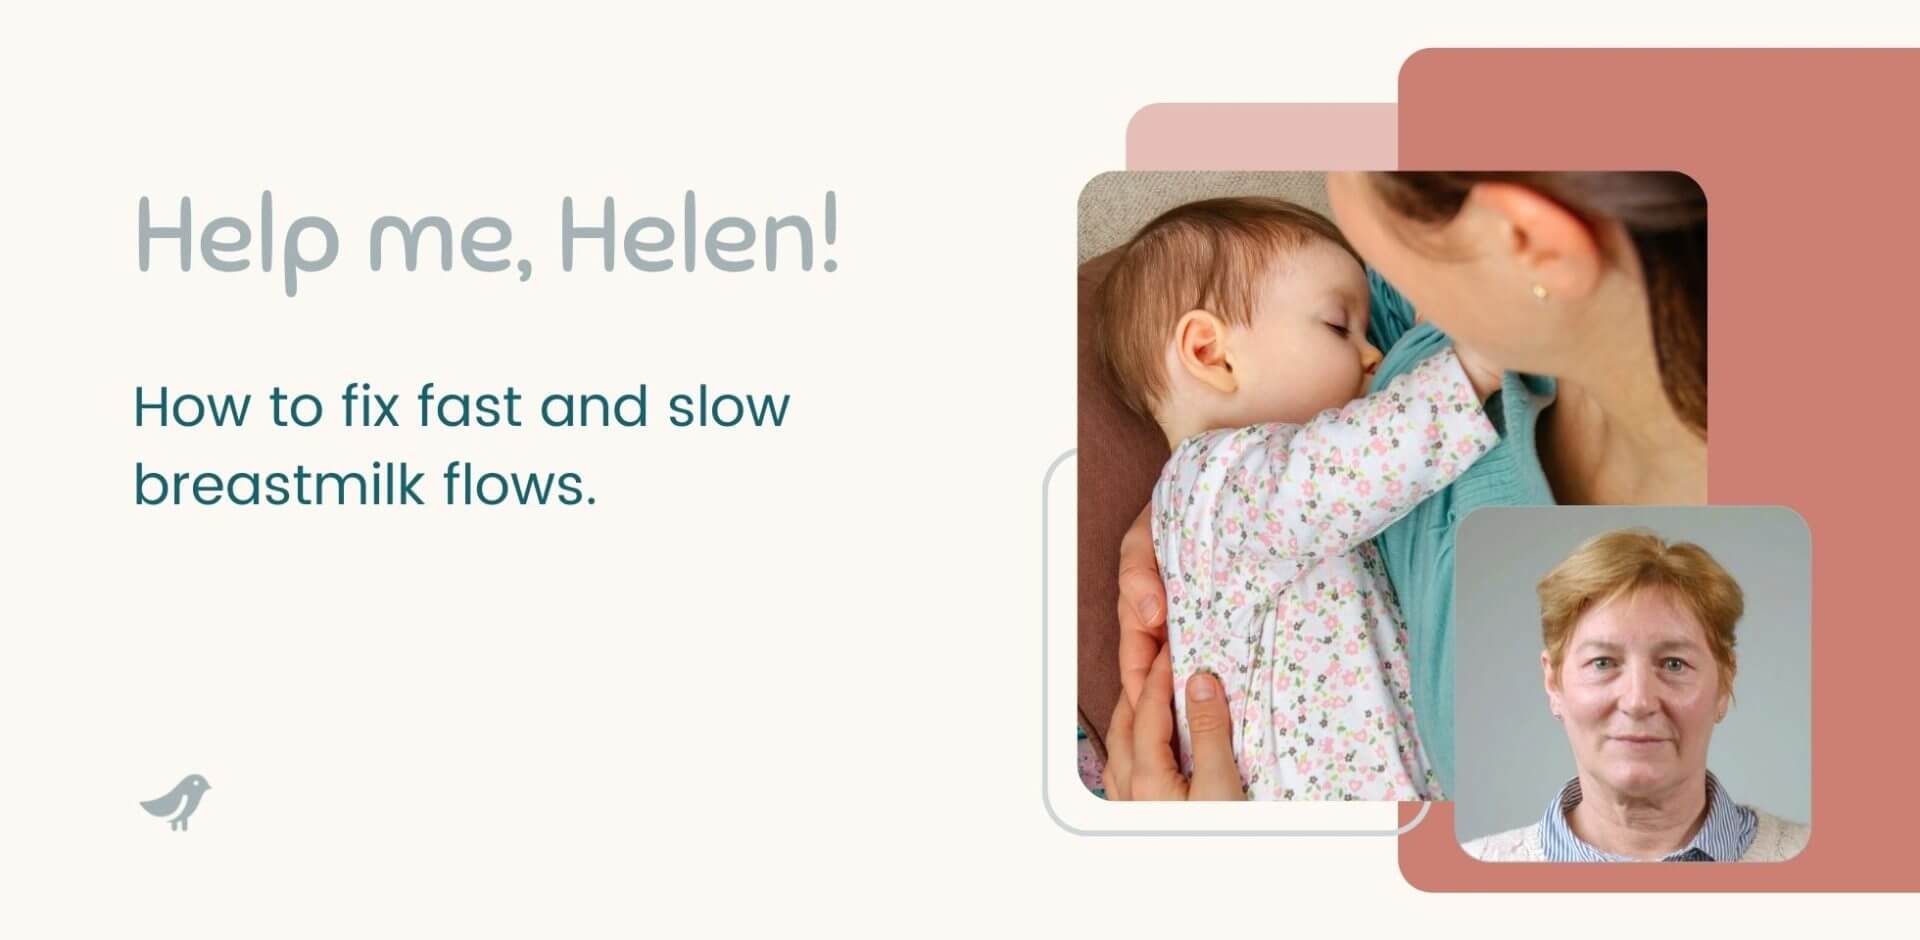 Help Me, Helen! How to Fix Fast and Slow Breastmilk Flows.